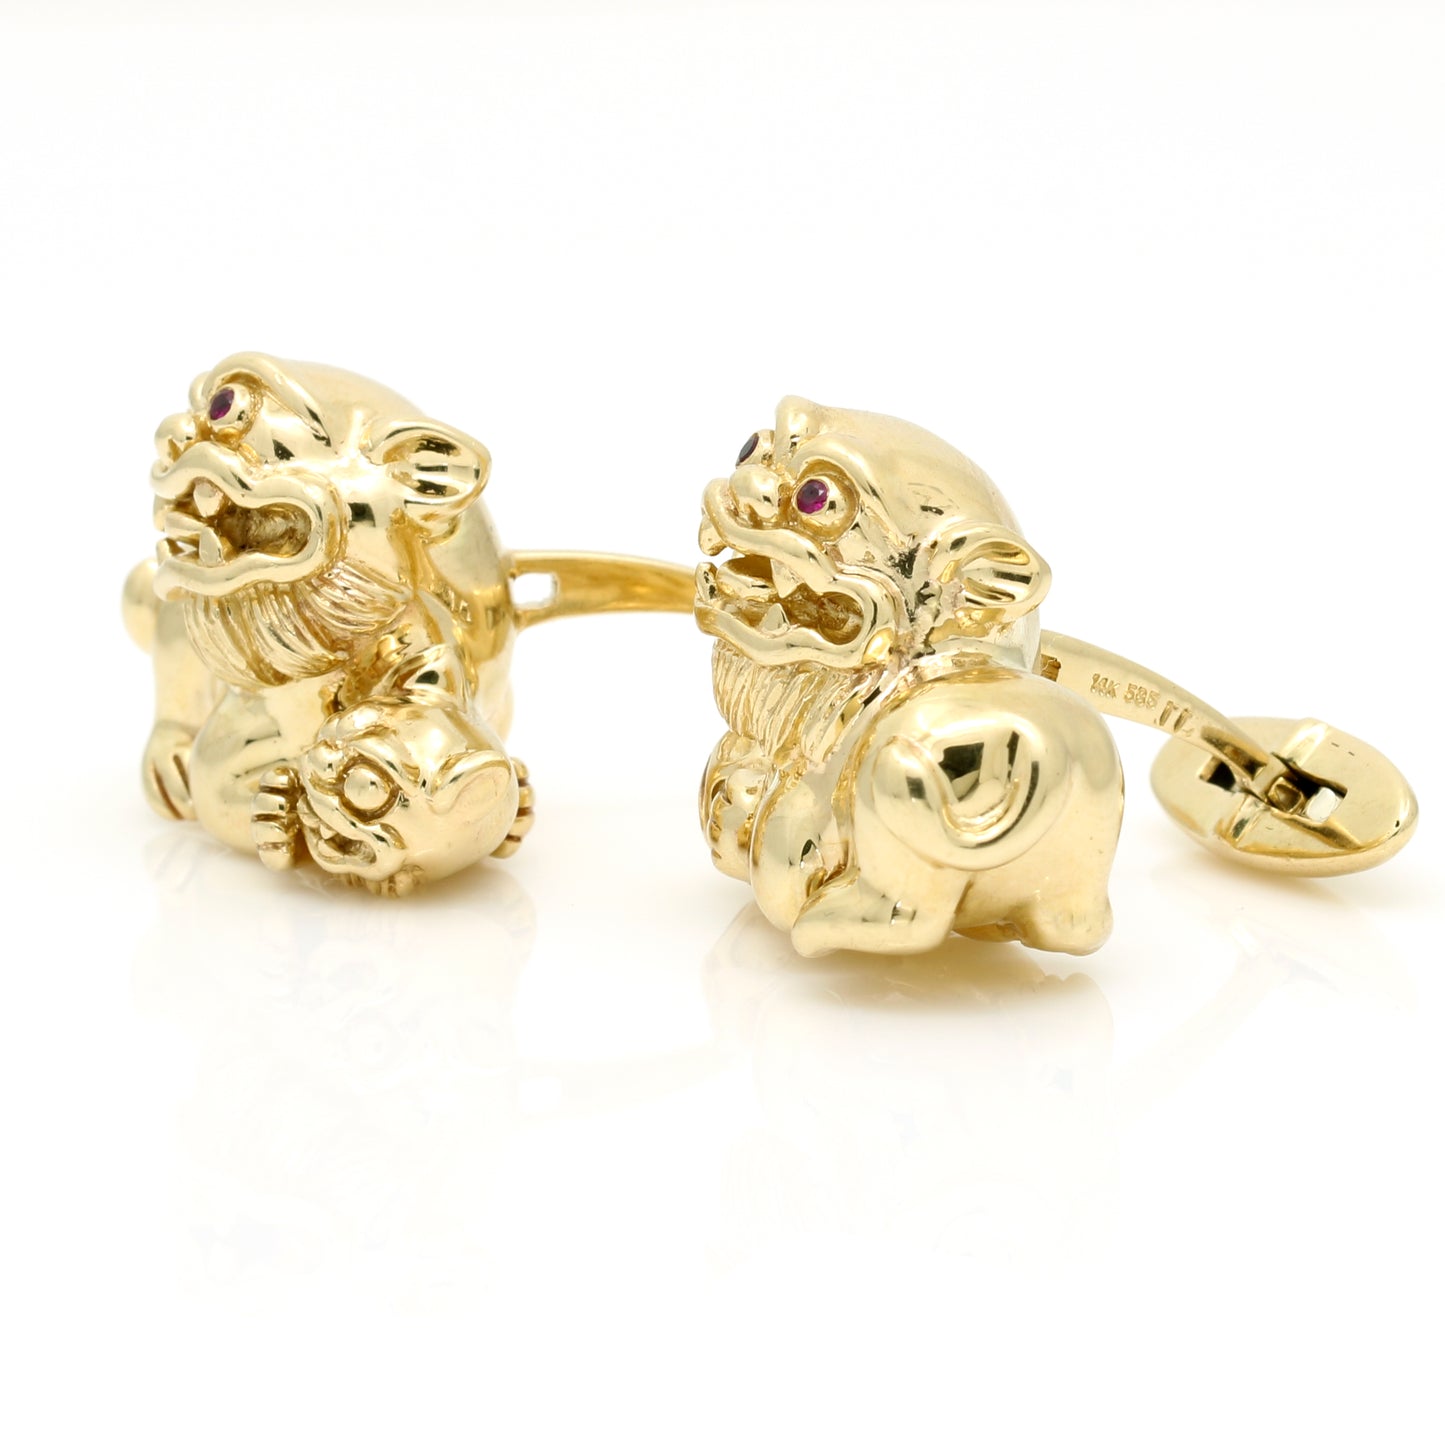 Oversize Foo Dog Cufflinks - 14K Yellow Gold with Ruby Eyes Signed JL